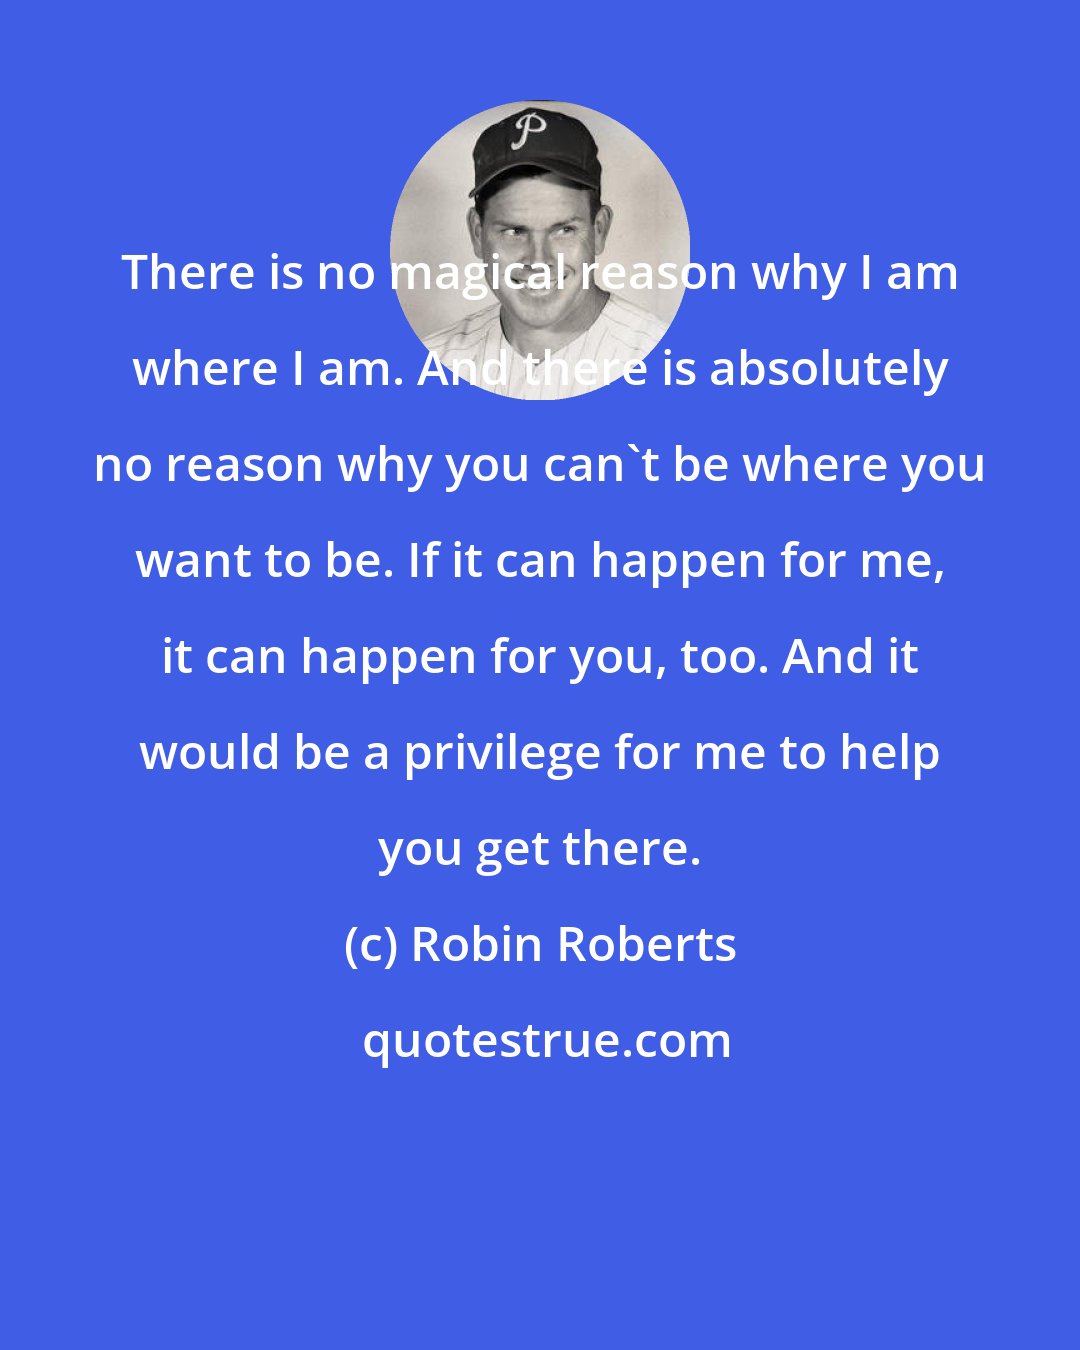 Robin Roberts: There is no magical reason why I am where I am. And there is absolutely no reason why you can't be where you want to be. If it can happen for me, it can happen for you, too. And it would be a privilege for me to help you get there.